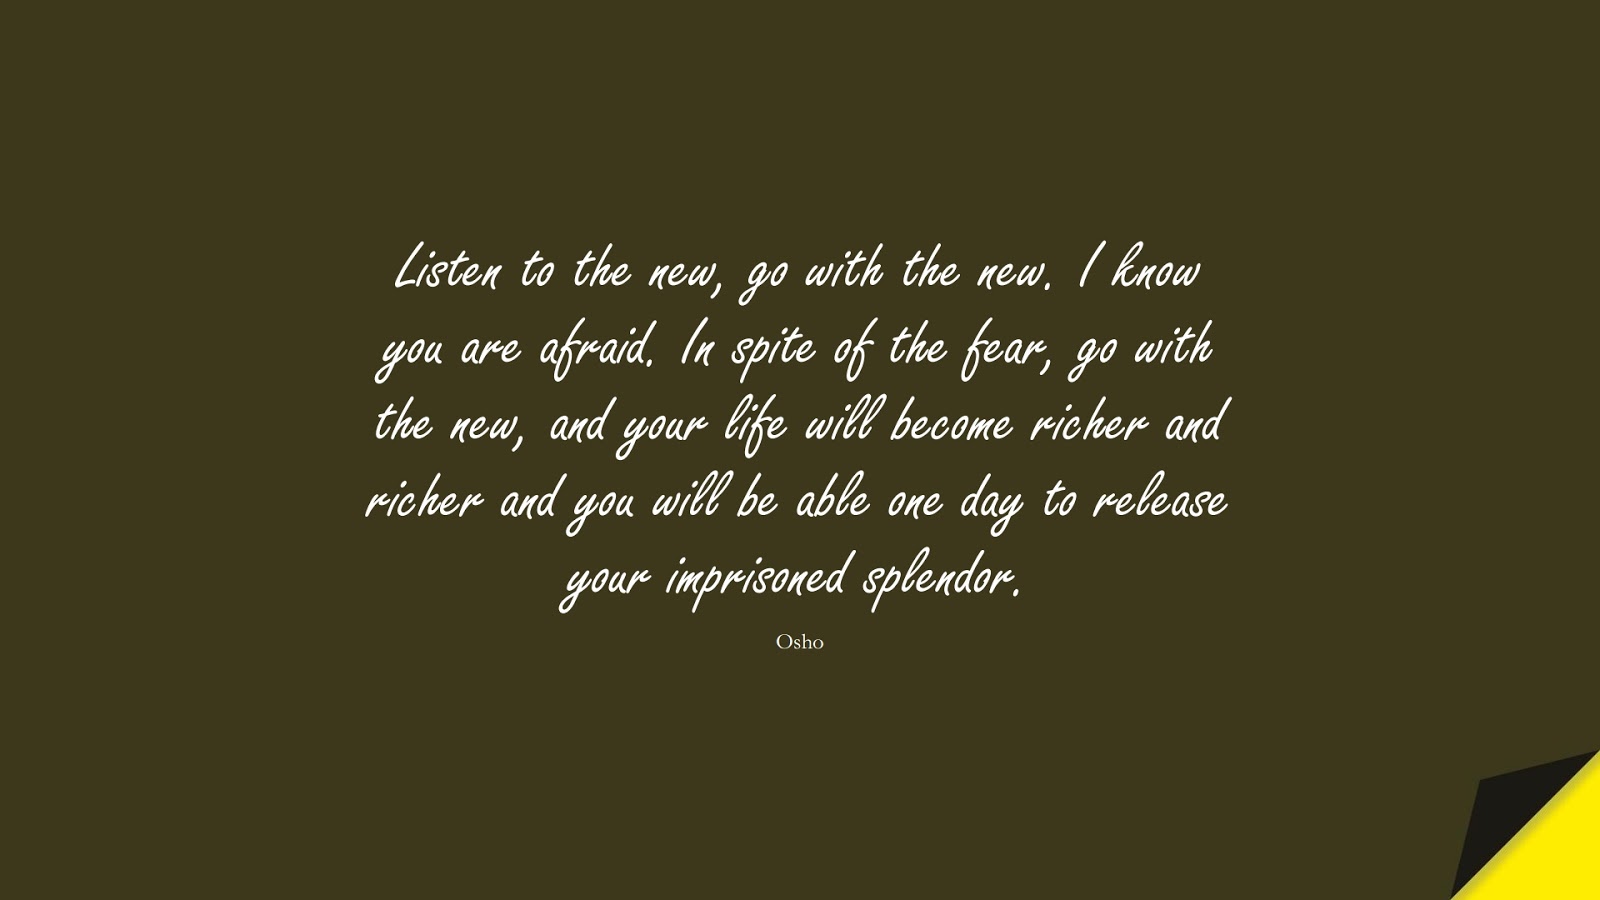 Listen to the new, go with the new. I know you are afraid. In spite of the fear, go with the new, and your life will become richer and richer and you will be able one day to release your imprisoned splendor. (Osho);  #InspirationalQuotes